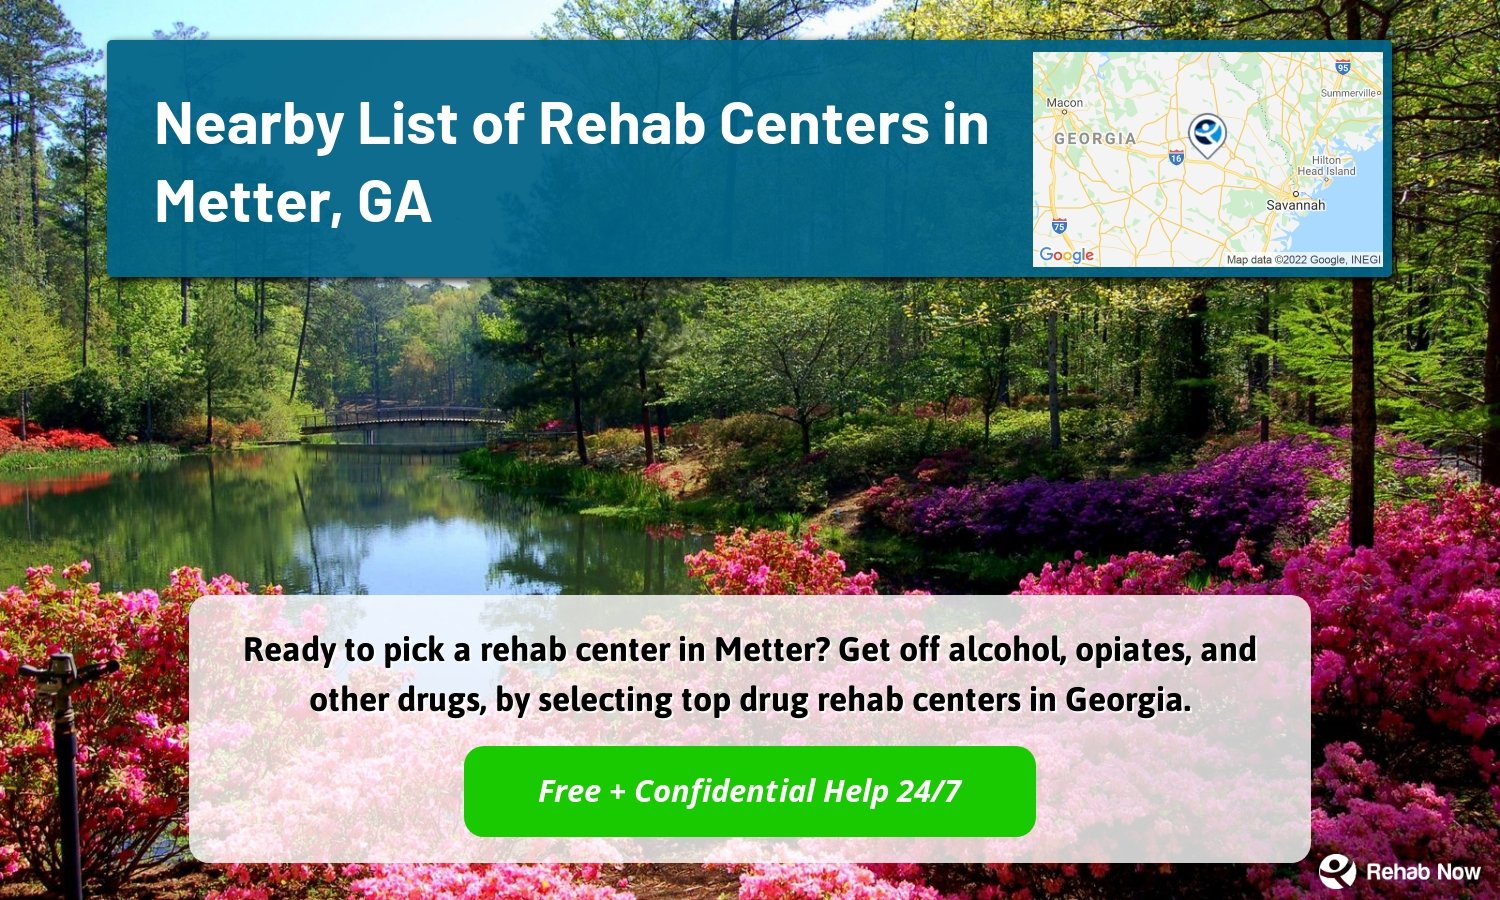 Ready to pick a rehab center in Metter? Get off alcohol, opiates, and other drugs, by selecting top drug rehab centers in Georgia.